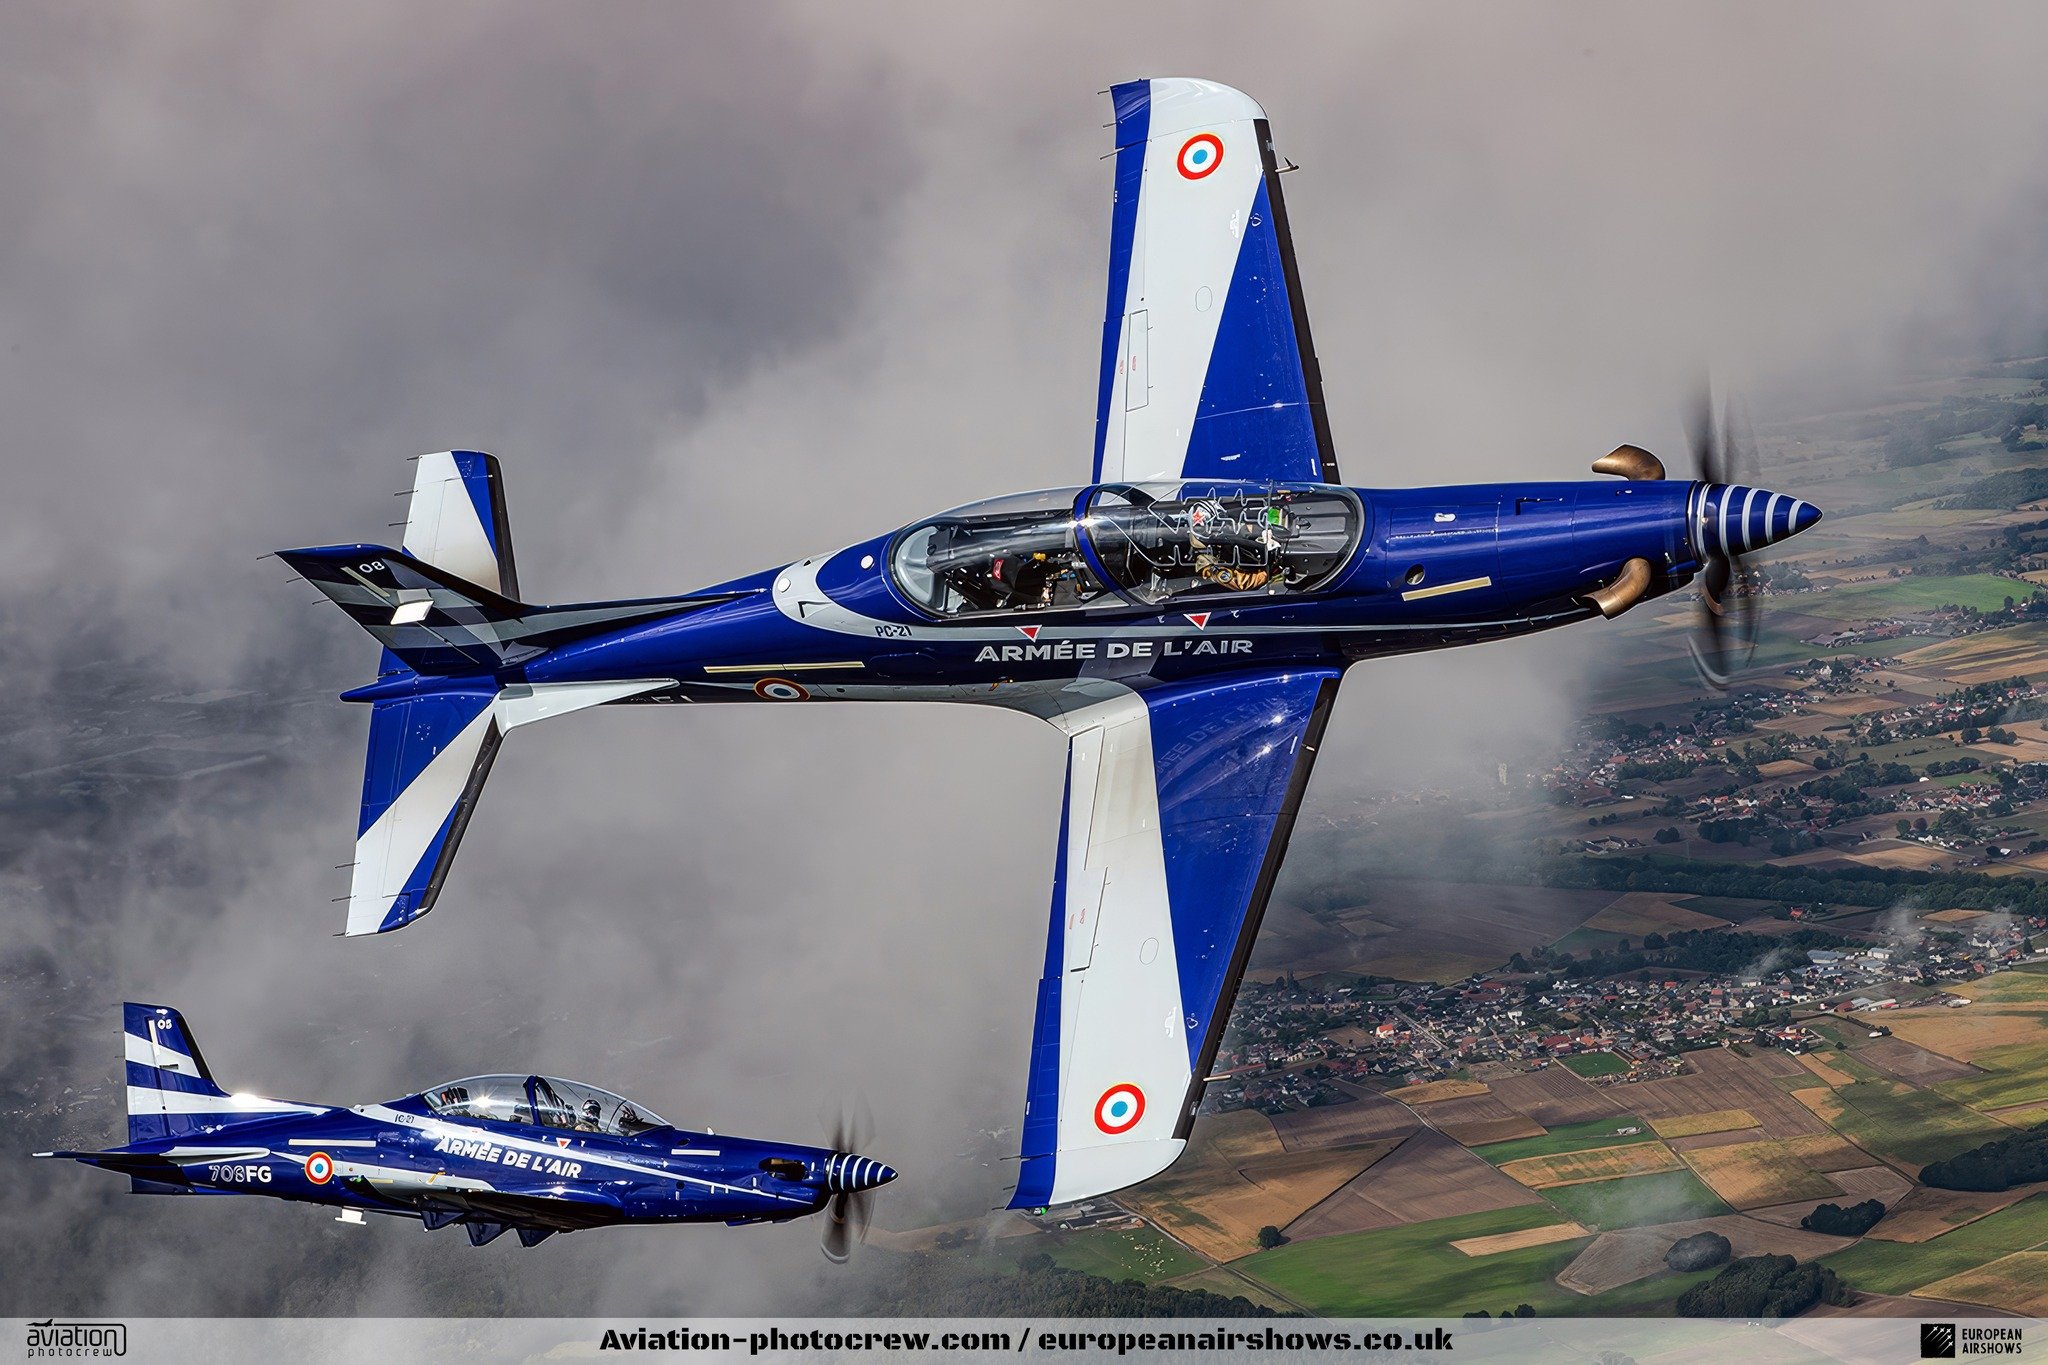 𝐀𝐈𝐑𝐒𝐇𝐎𝐖 𝐍𝐄𝐖𝐒: The Mustang X-Ray tactical demonstration team of the French Air and Space Force will be returning to the Festival A&eacute;reo Internacional de Motril on Sunday, 9th of June 2024!

Looking to take stunning photos from the air